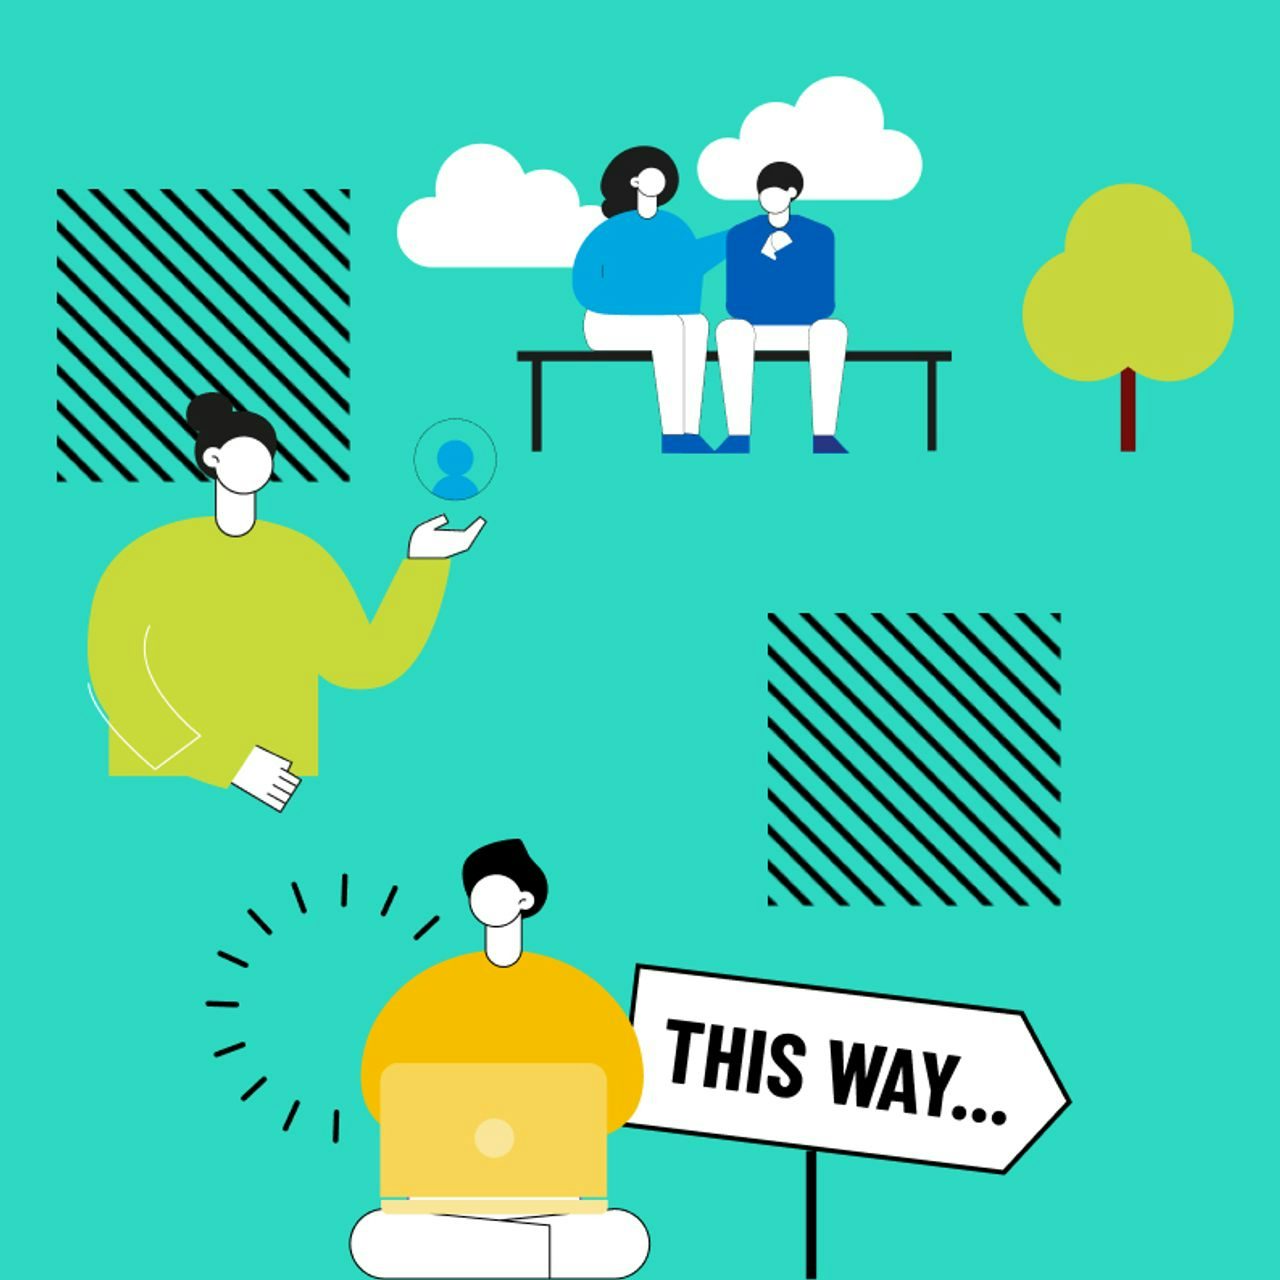 Vector illustration of abstract characters in a meeting and guidance concept, with 'THIS WAY...' directional sign on a turquoise background.